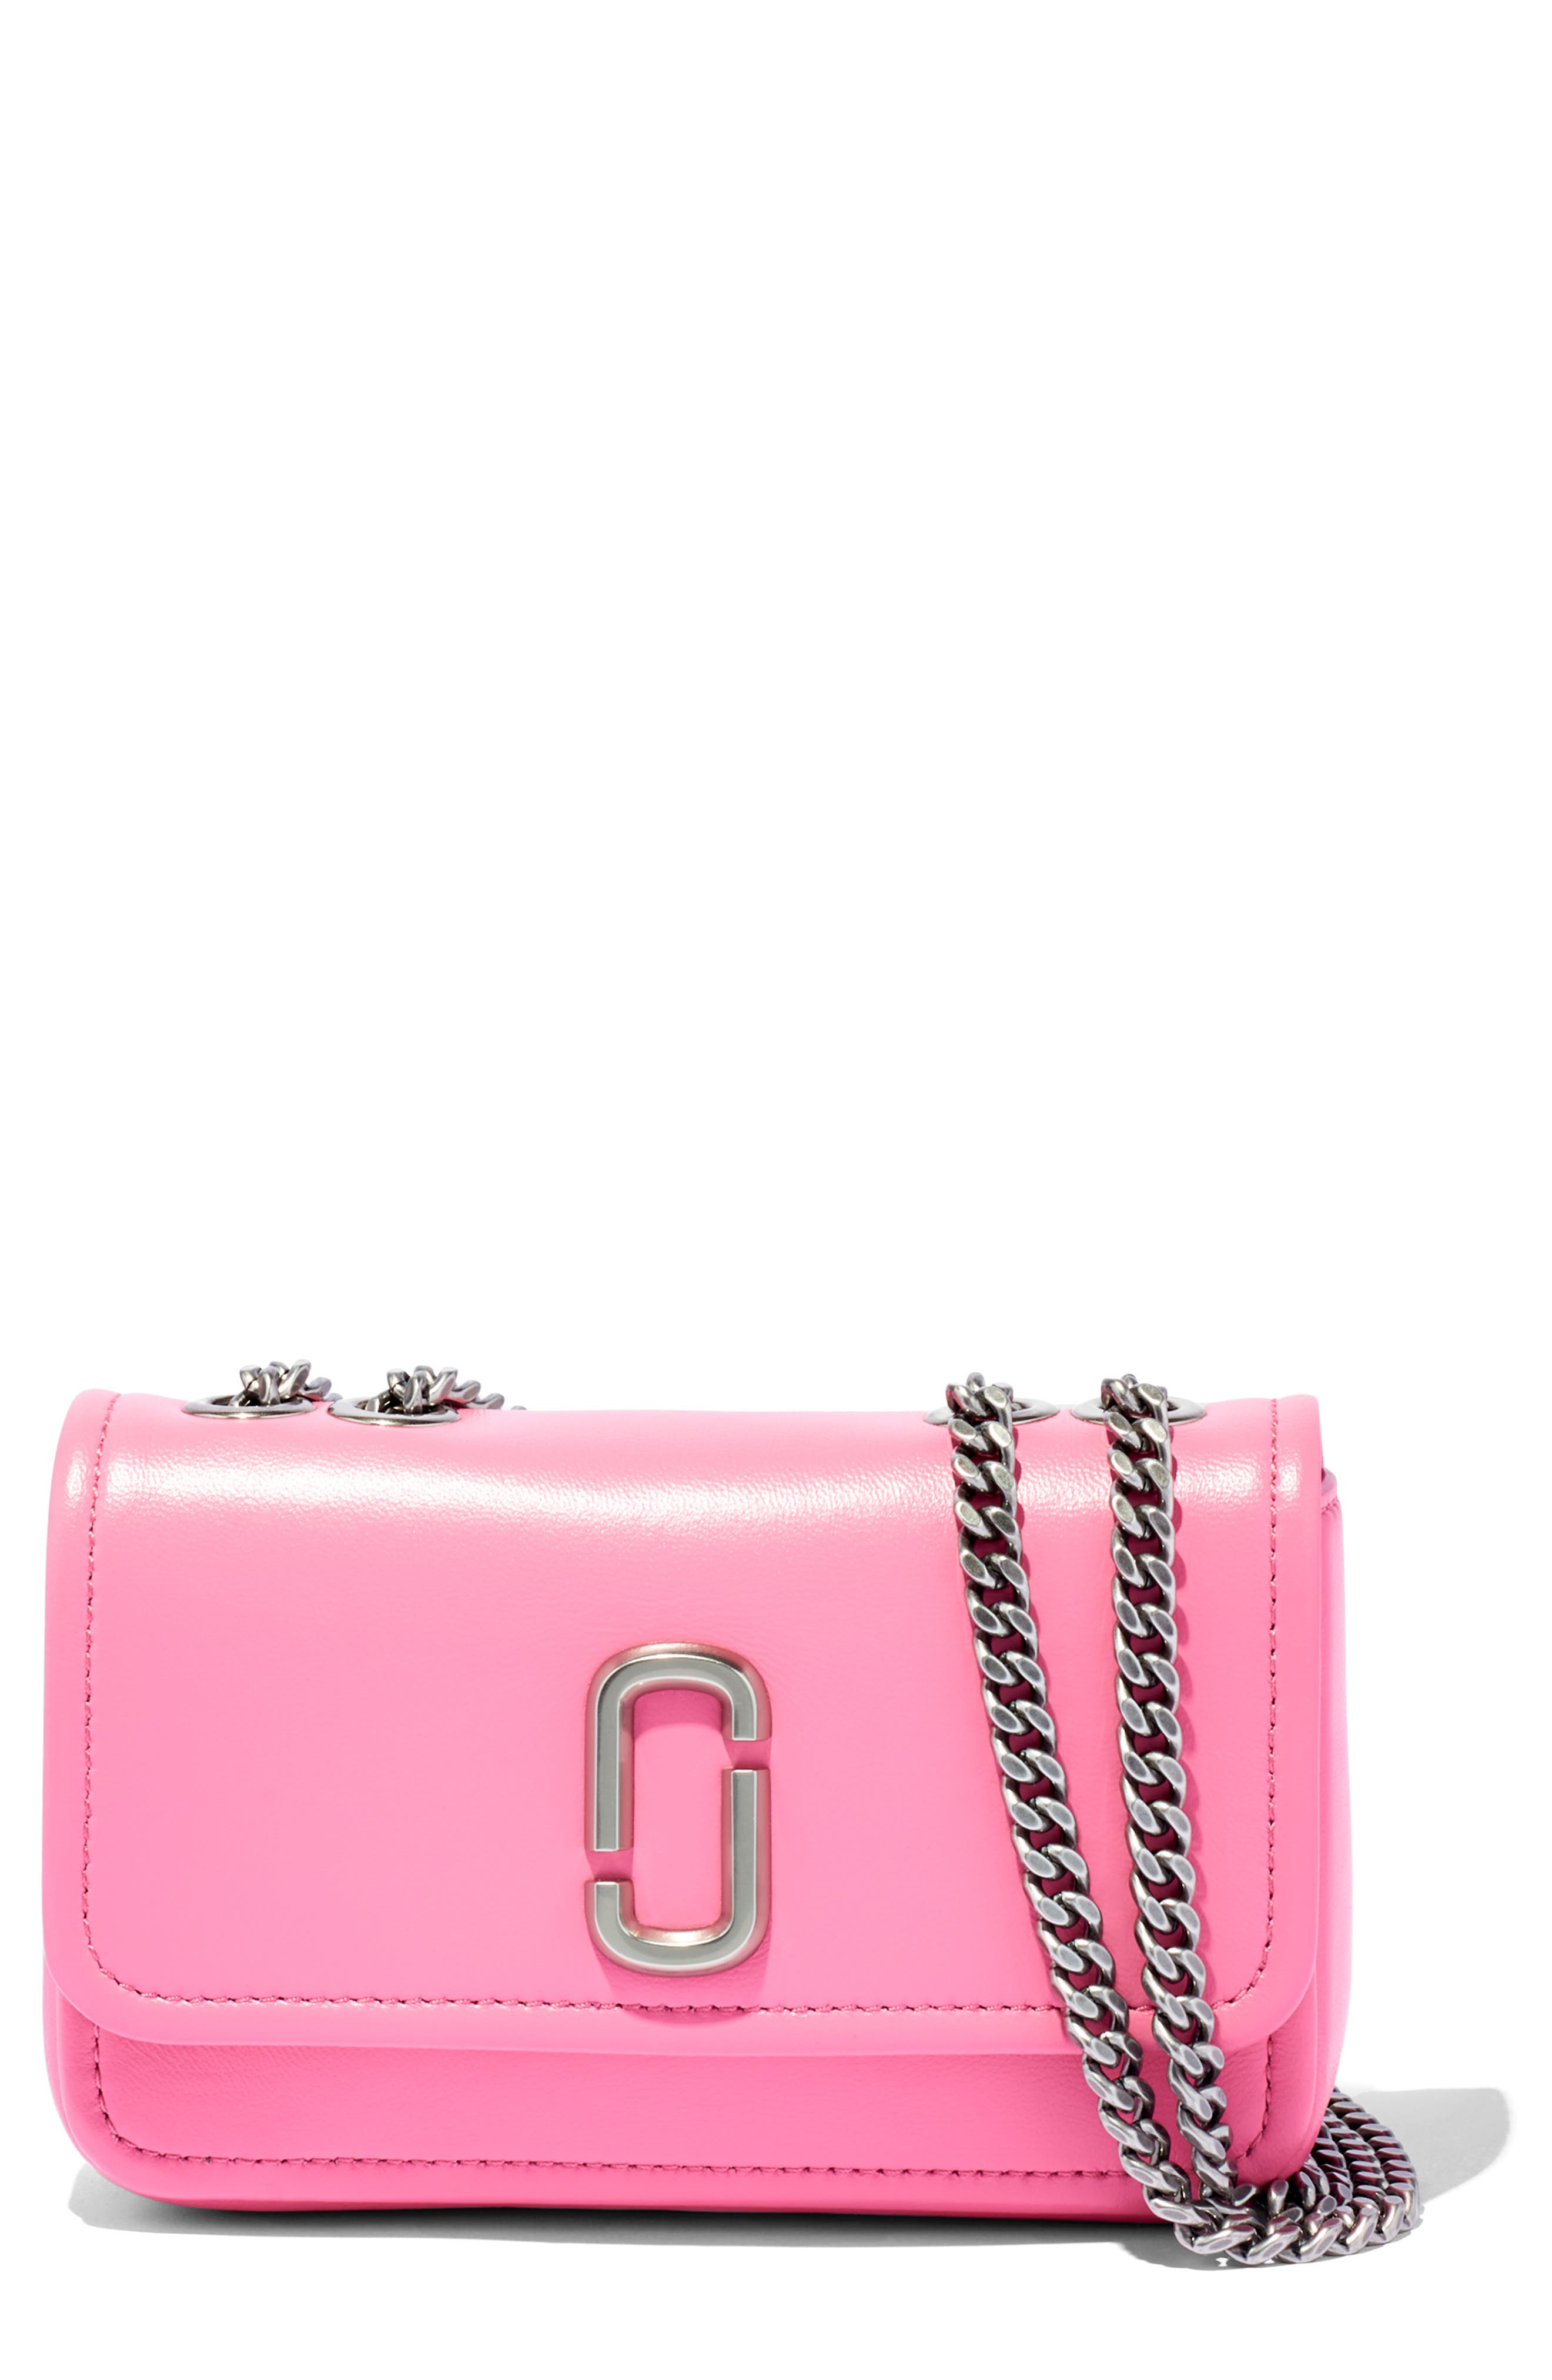 Marc Jacobs The Glam Shot Mini Convertible Leather Crossbody Bag in Morning Glory